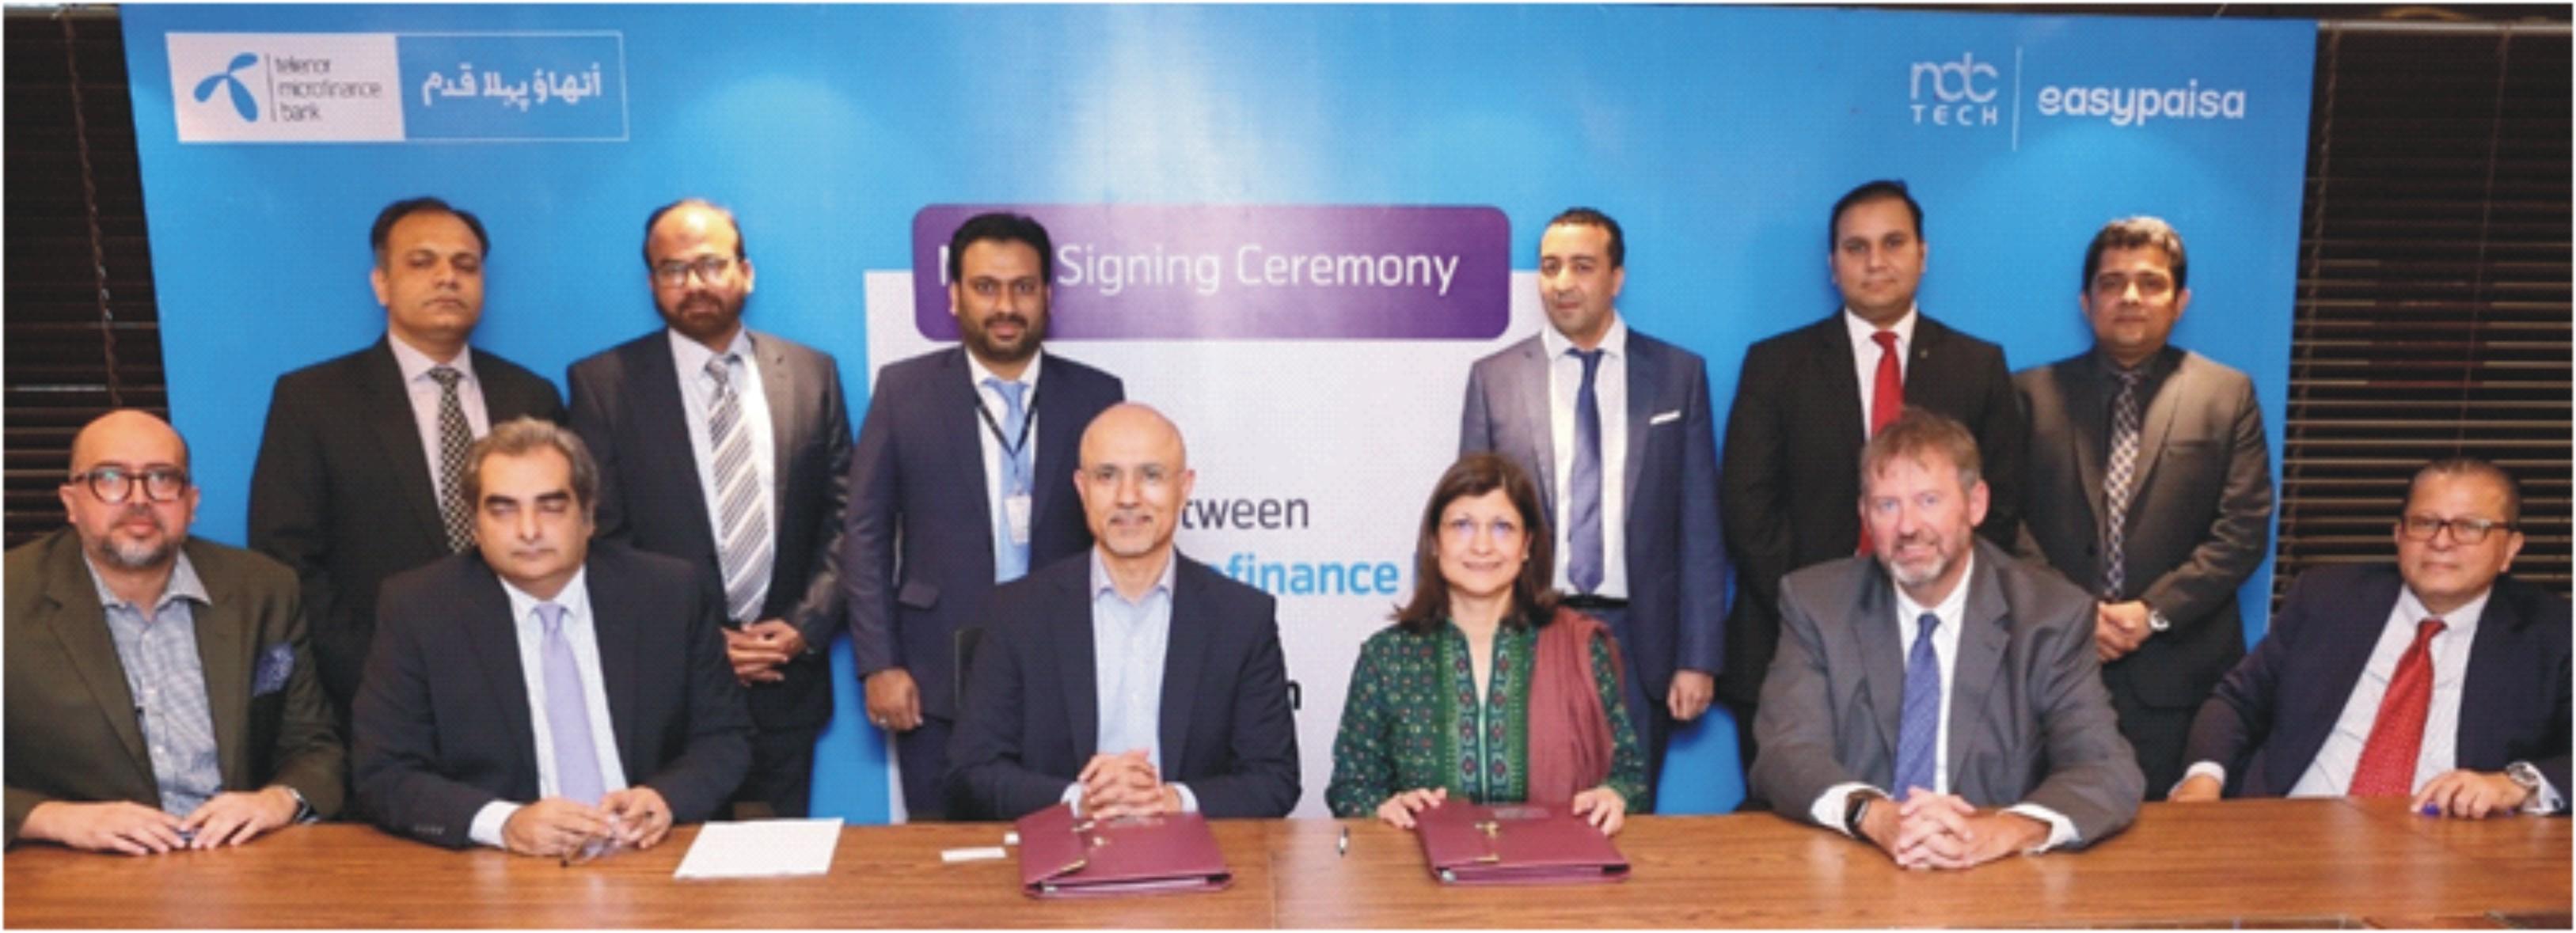 TELENOR MICROFINANCE BANK SIGNS AGREEMENT WITH NDCTECH TO UPGRADE CORE BANKING SYSTEM